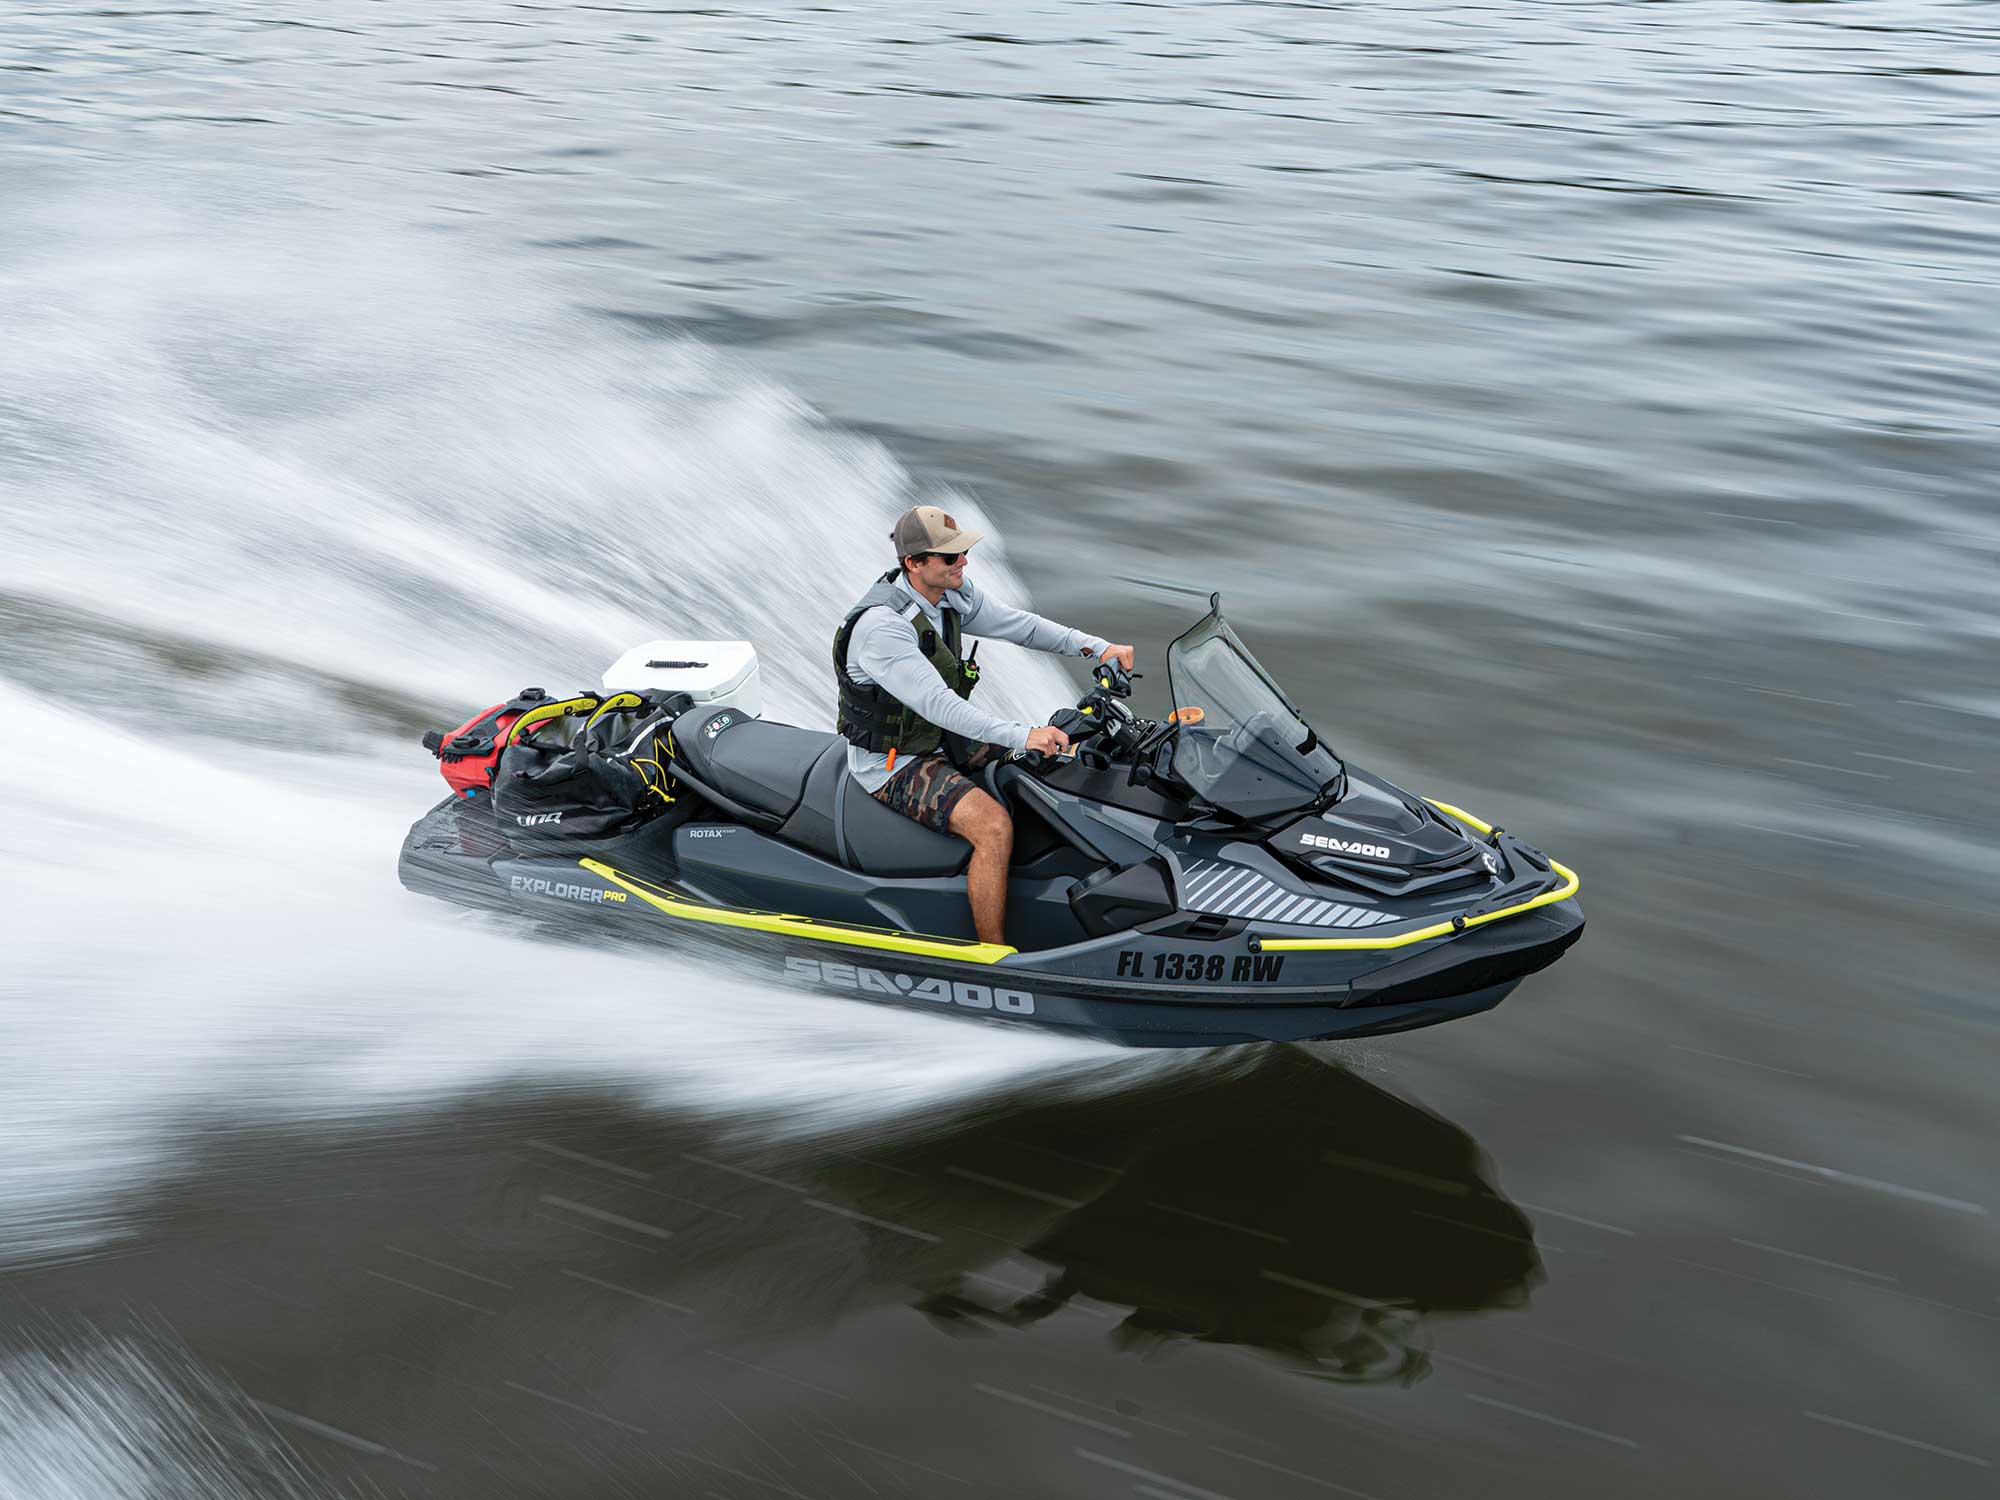 32 Must Have Jet Ski Accessories - Recommended for PWC Enthusiasts